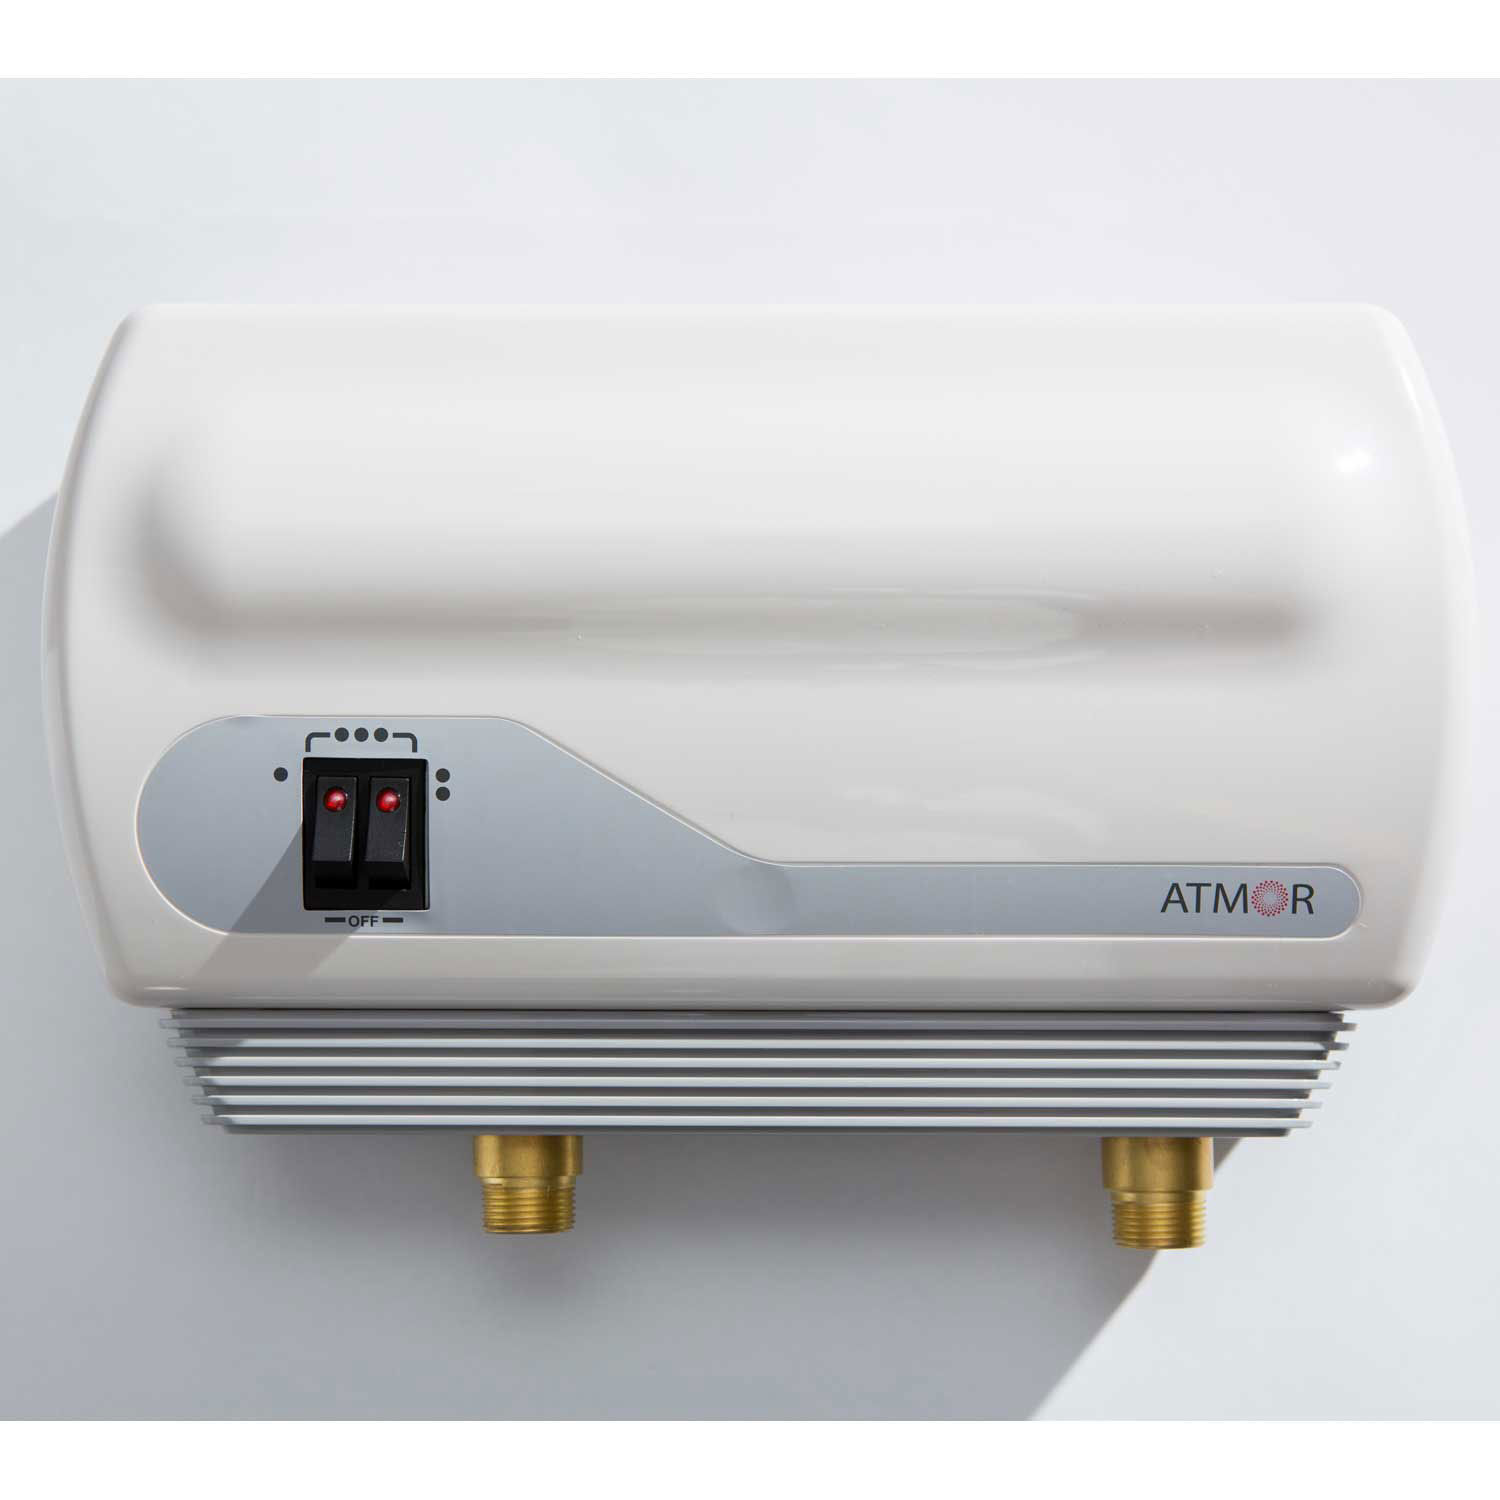 Atmor Point Of Use Tankless Electric Instant Water Heater 3kW 110V AT